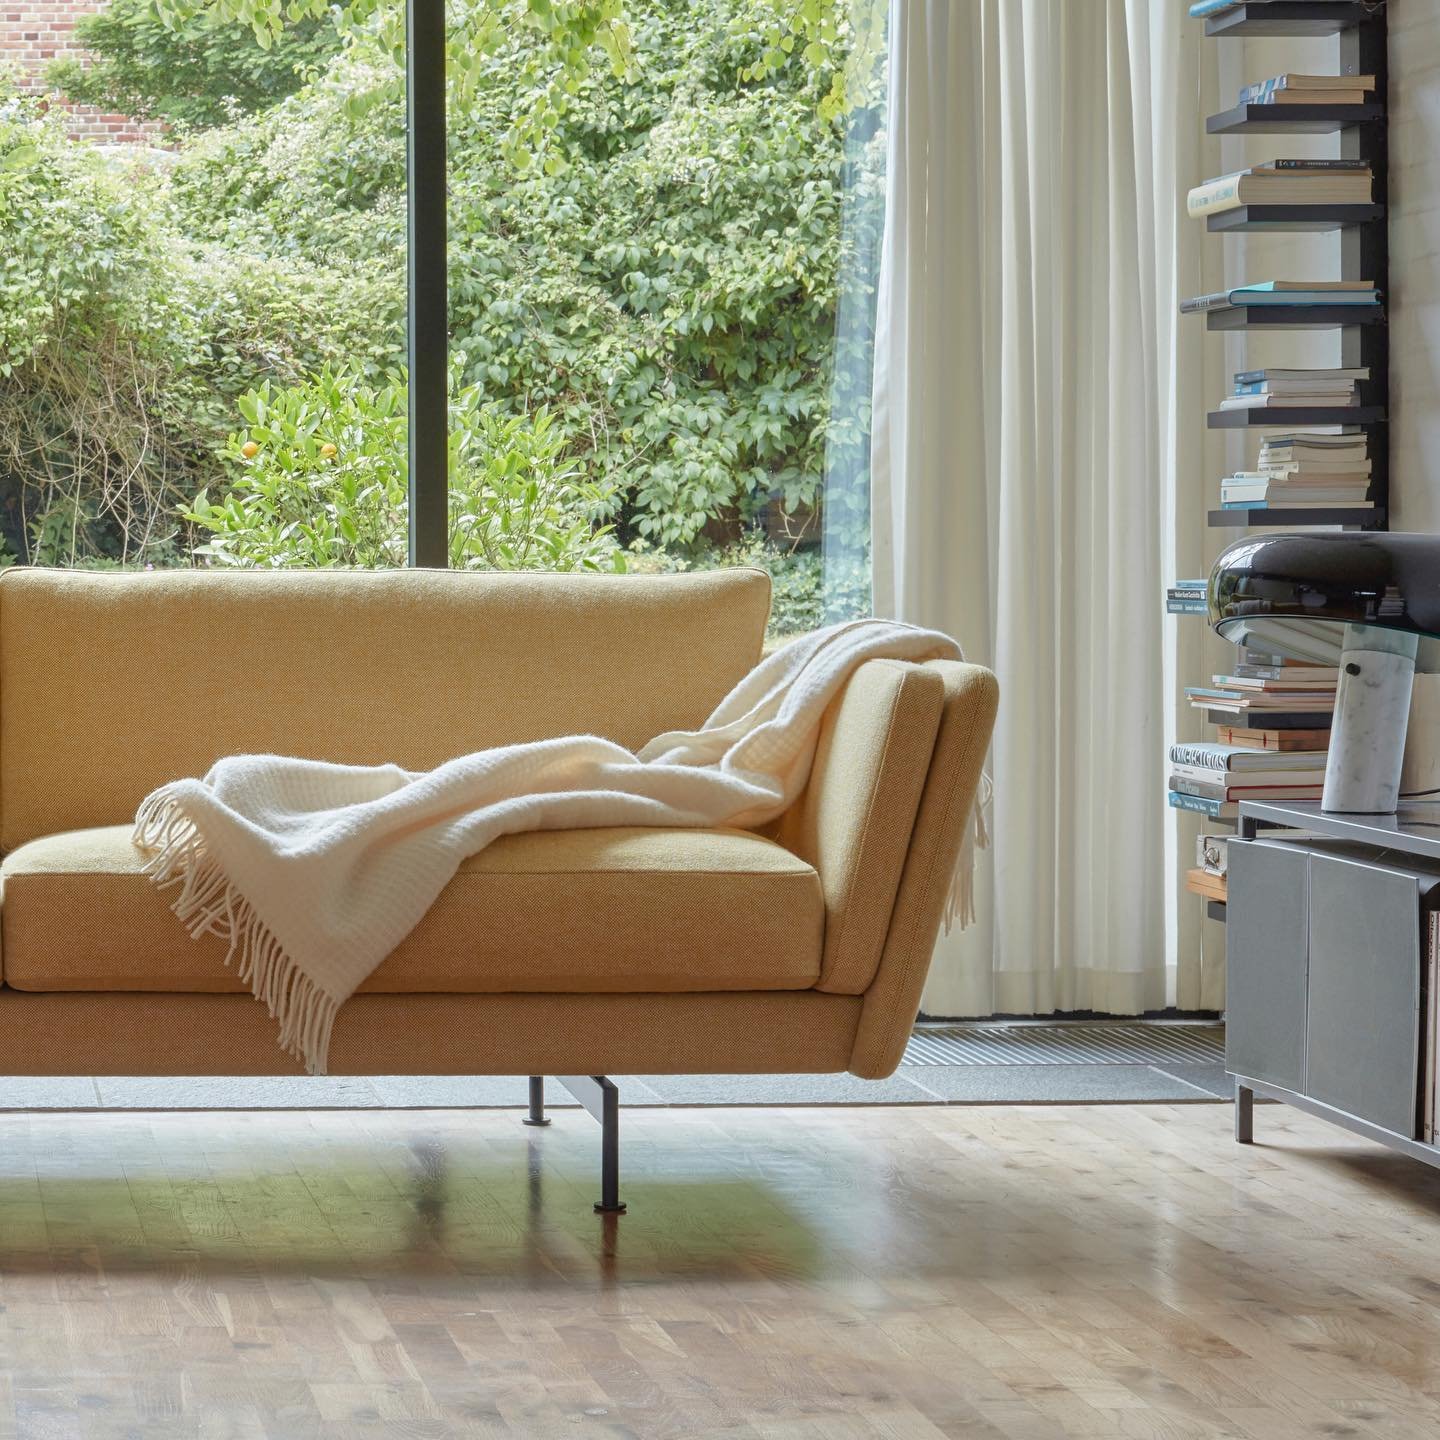 Introducing Grasp Sofa at @3daysofdesign. The design is Scandinavian, modern and pure - A new interpretation of the mid-century Danish design sofas. The distinct and architectural clean silhouette of the sofa is contrasted by the soft and rounded cus